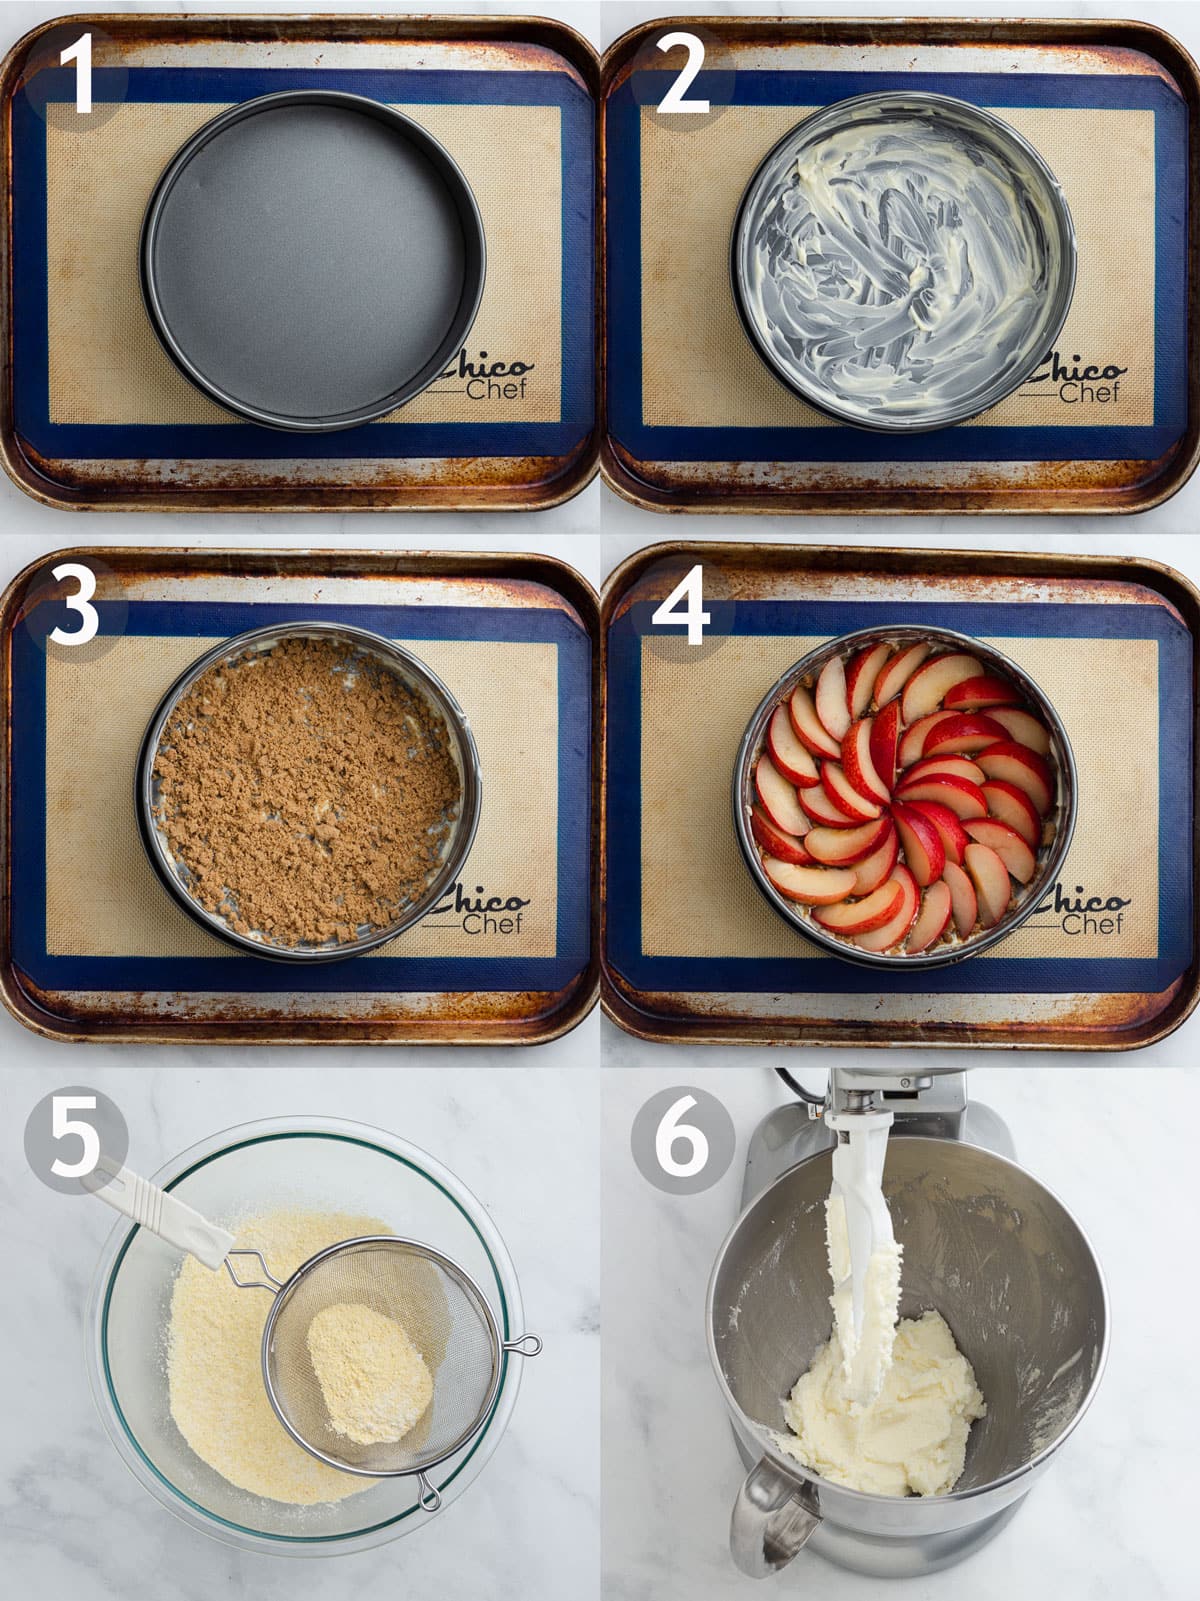 Steps to making cake including adding butter, sugar and plums to bottom of pan, sifting dry ingredients and creaming butter and sugar.